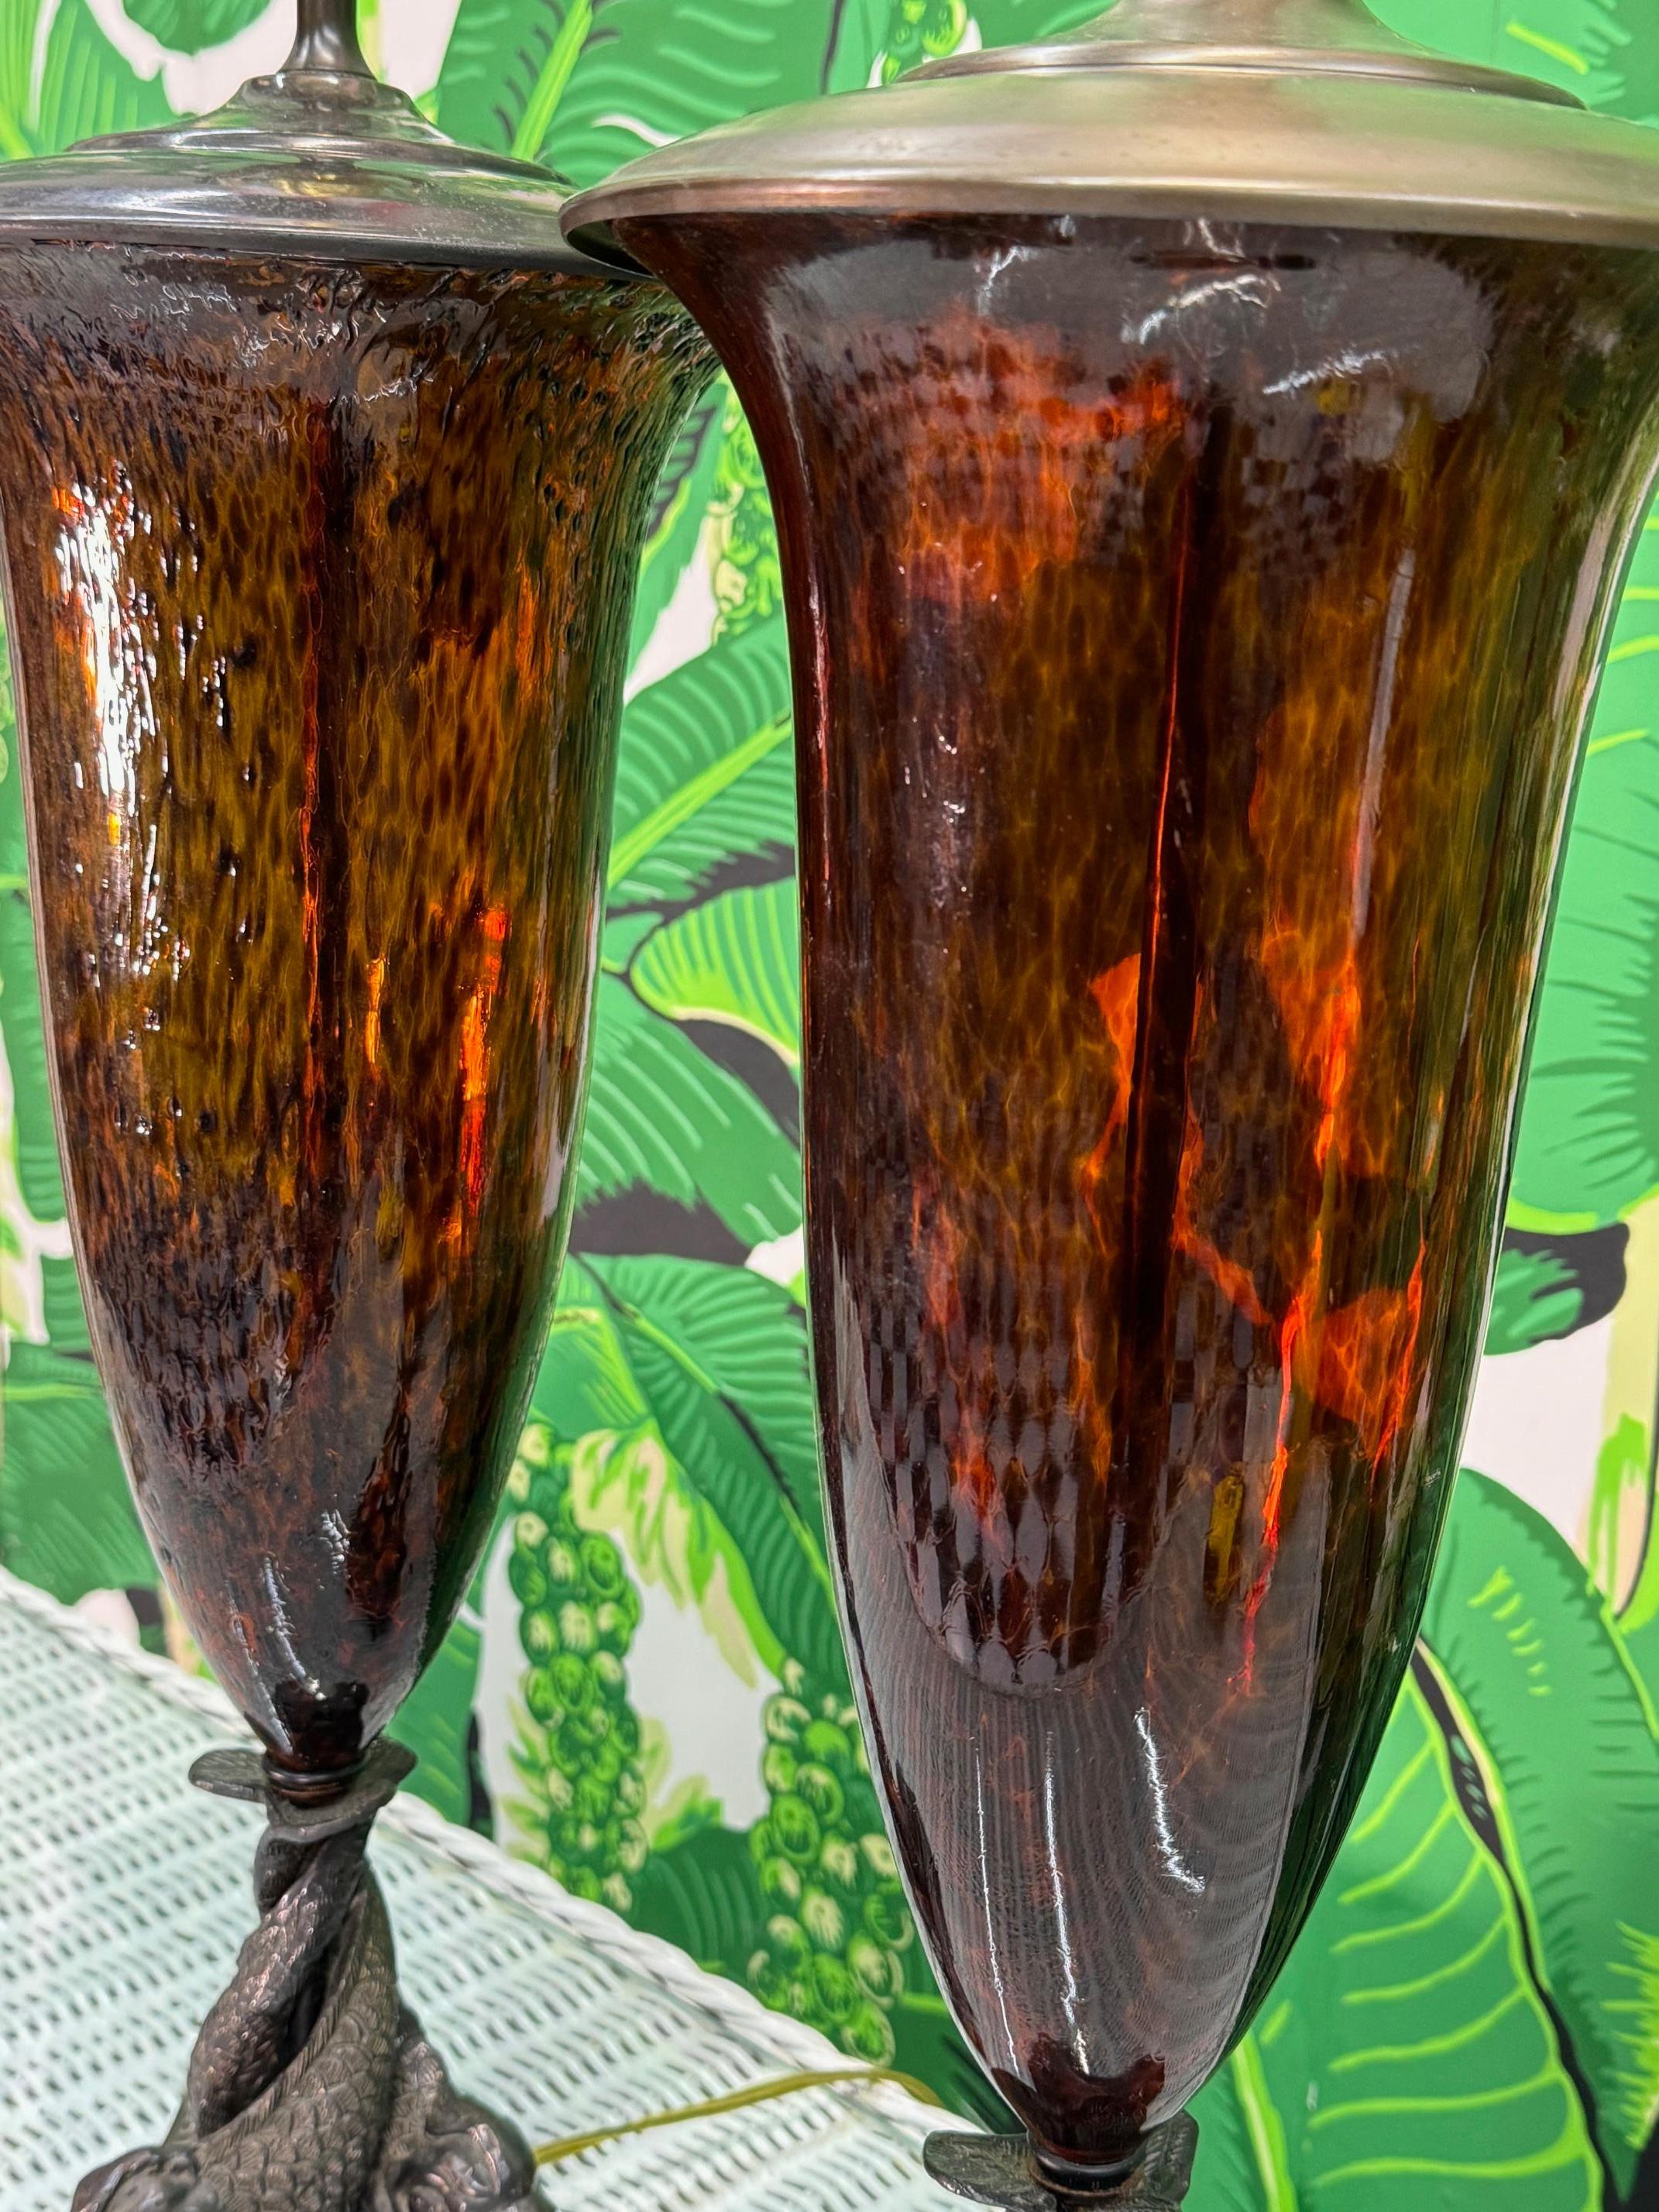 Pair of vintage table lamps feature a tortoise shell glass body and bronze japanese koi fish detailing. Good condition with minor imperfections consistent with age, see photos for condition details.
For a shipping quote to your exact zip code,